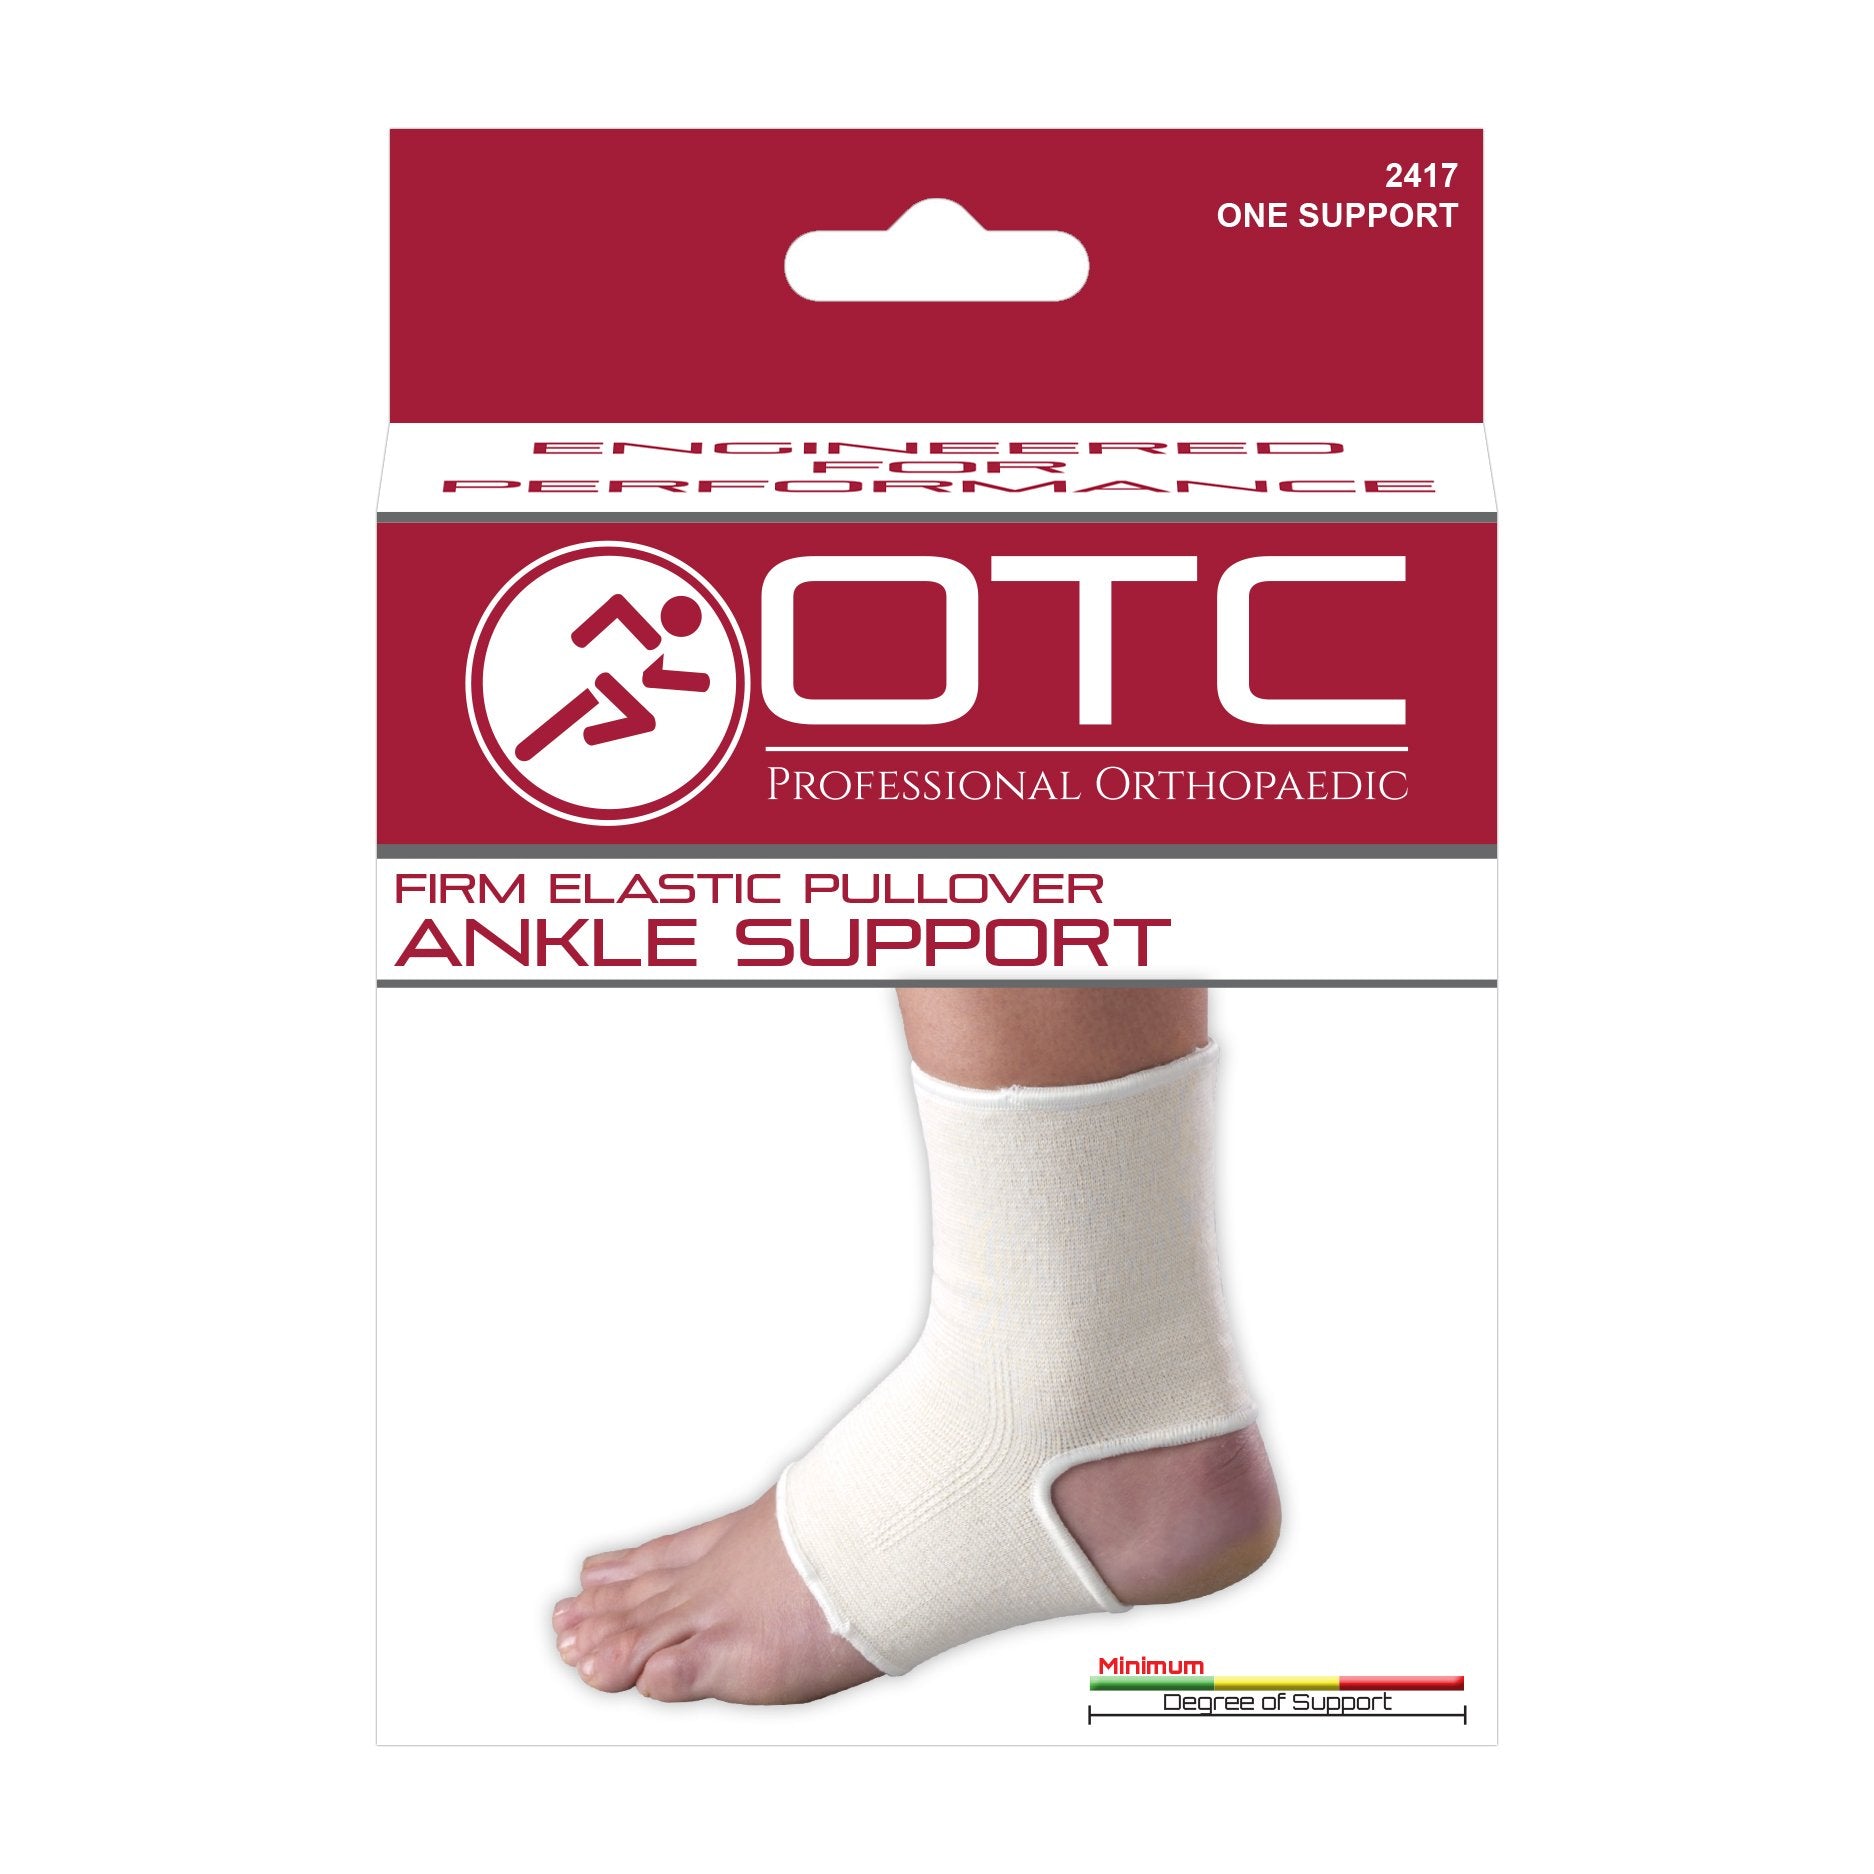 SAI ANKLE SUPPORT PULLOVER